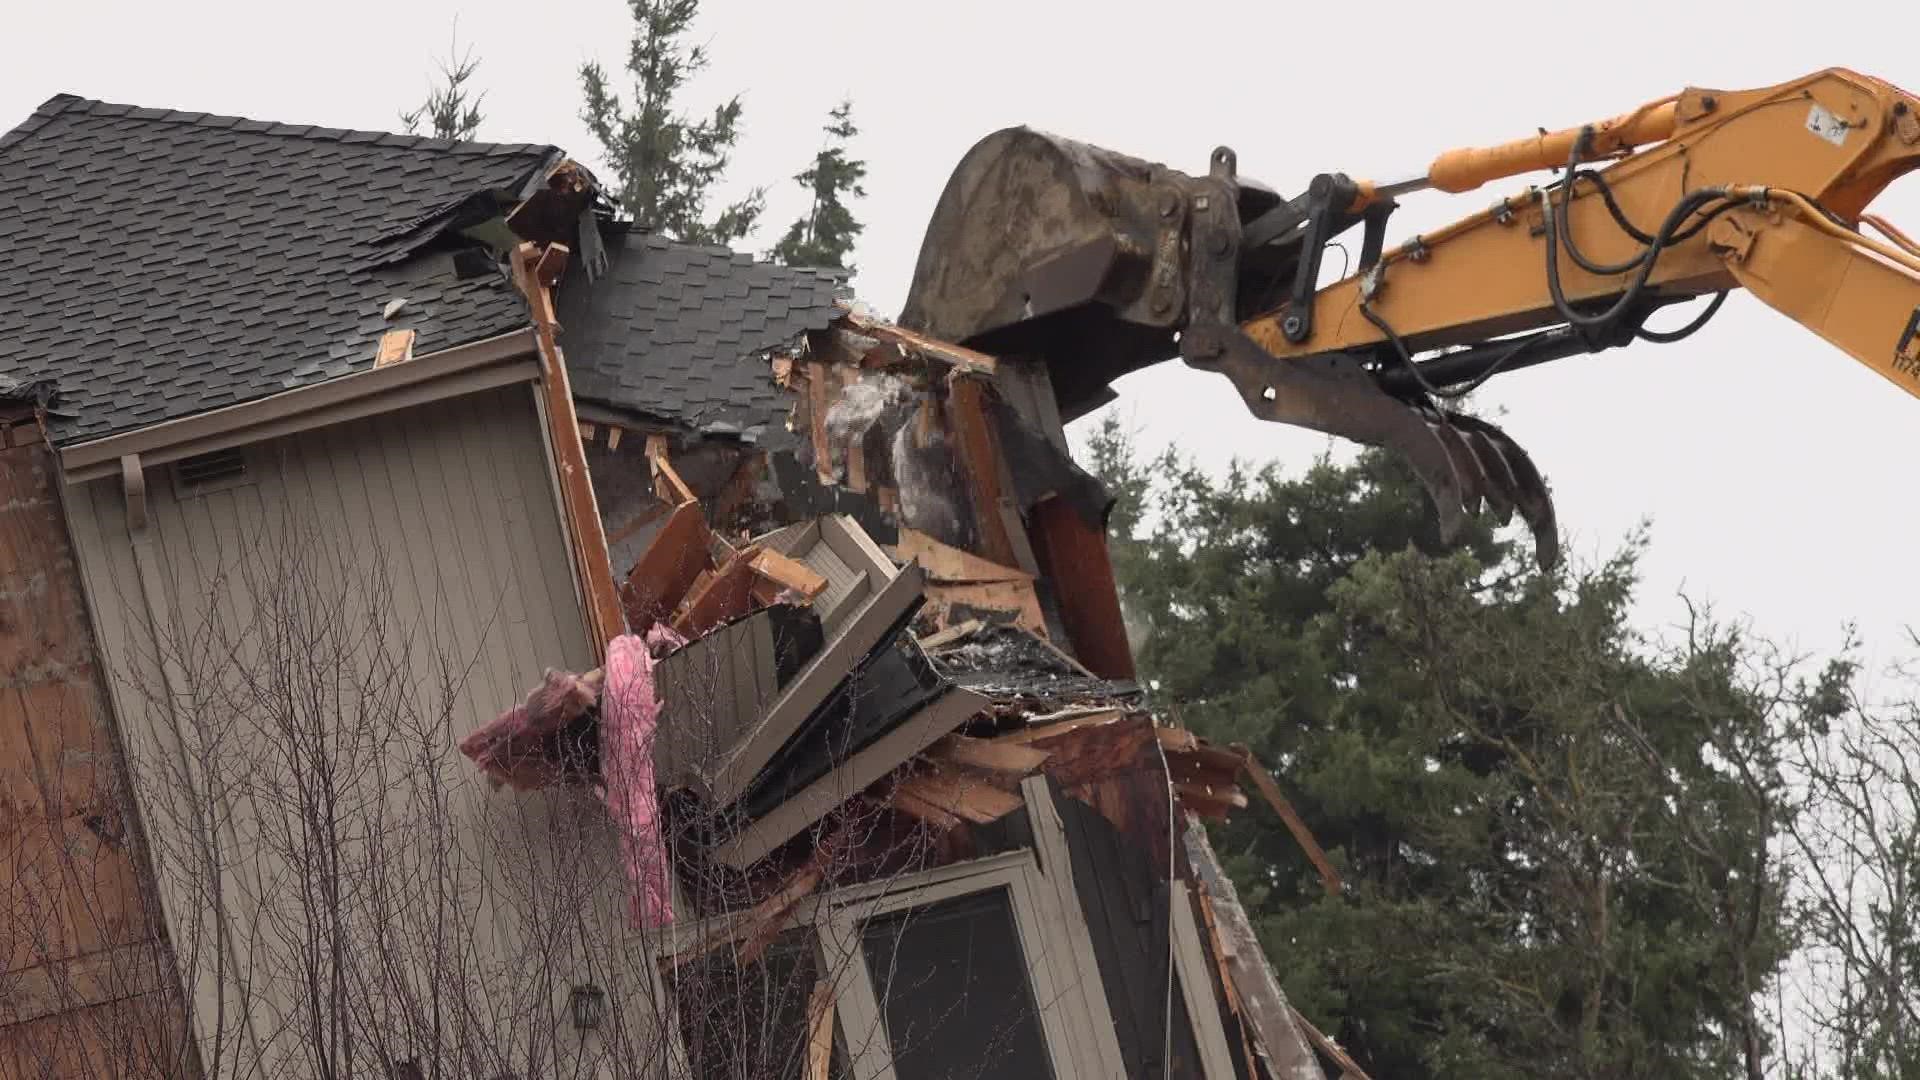 The house had been sitting at an angle since Jan. 17, when it was pushed off its foundation. The City of Bellevue says the cause is under investigation.